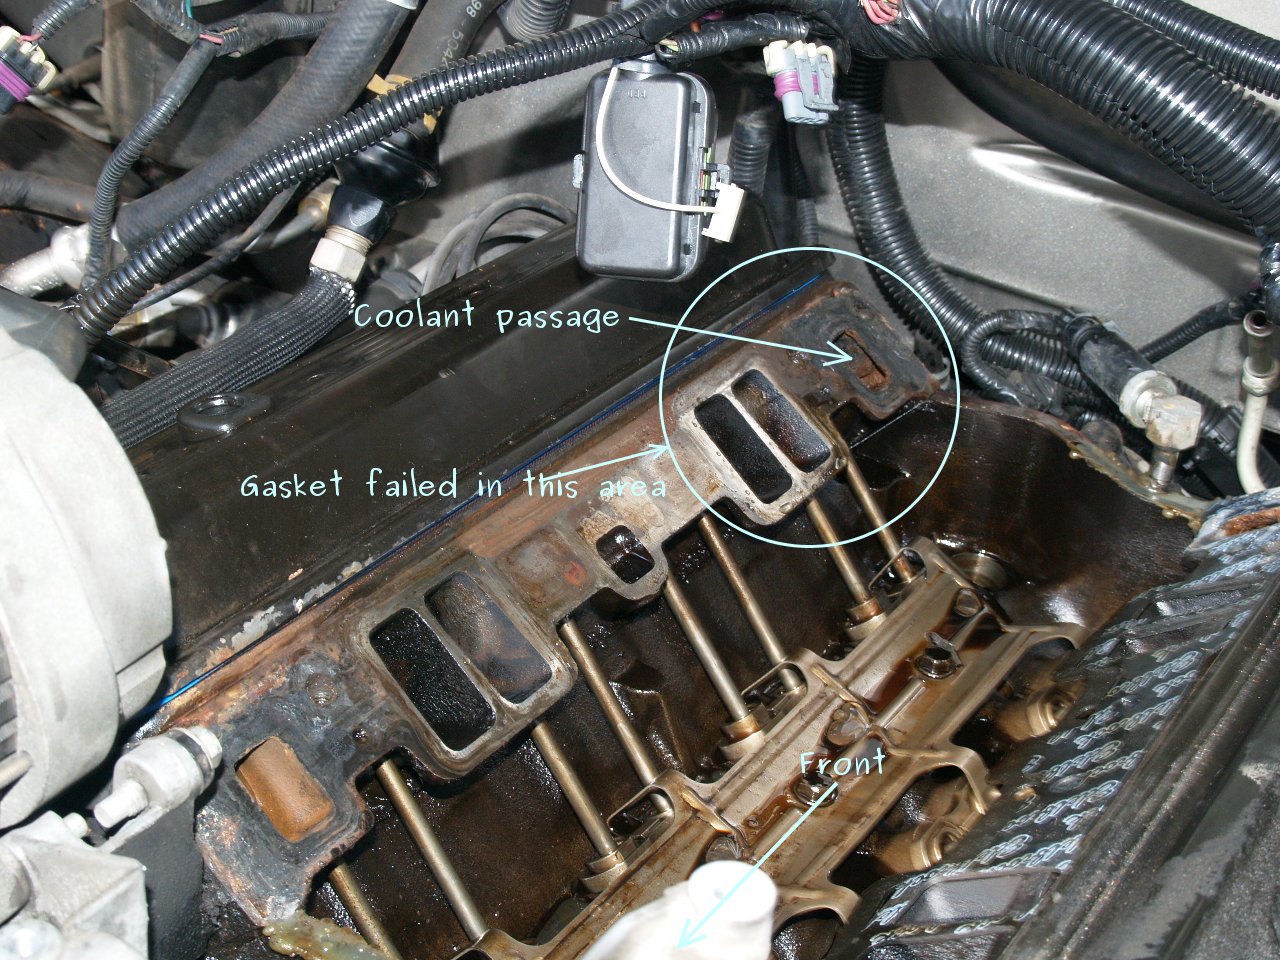 See P0519 in engine